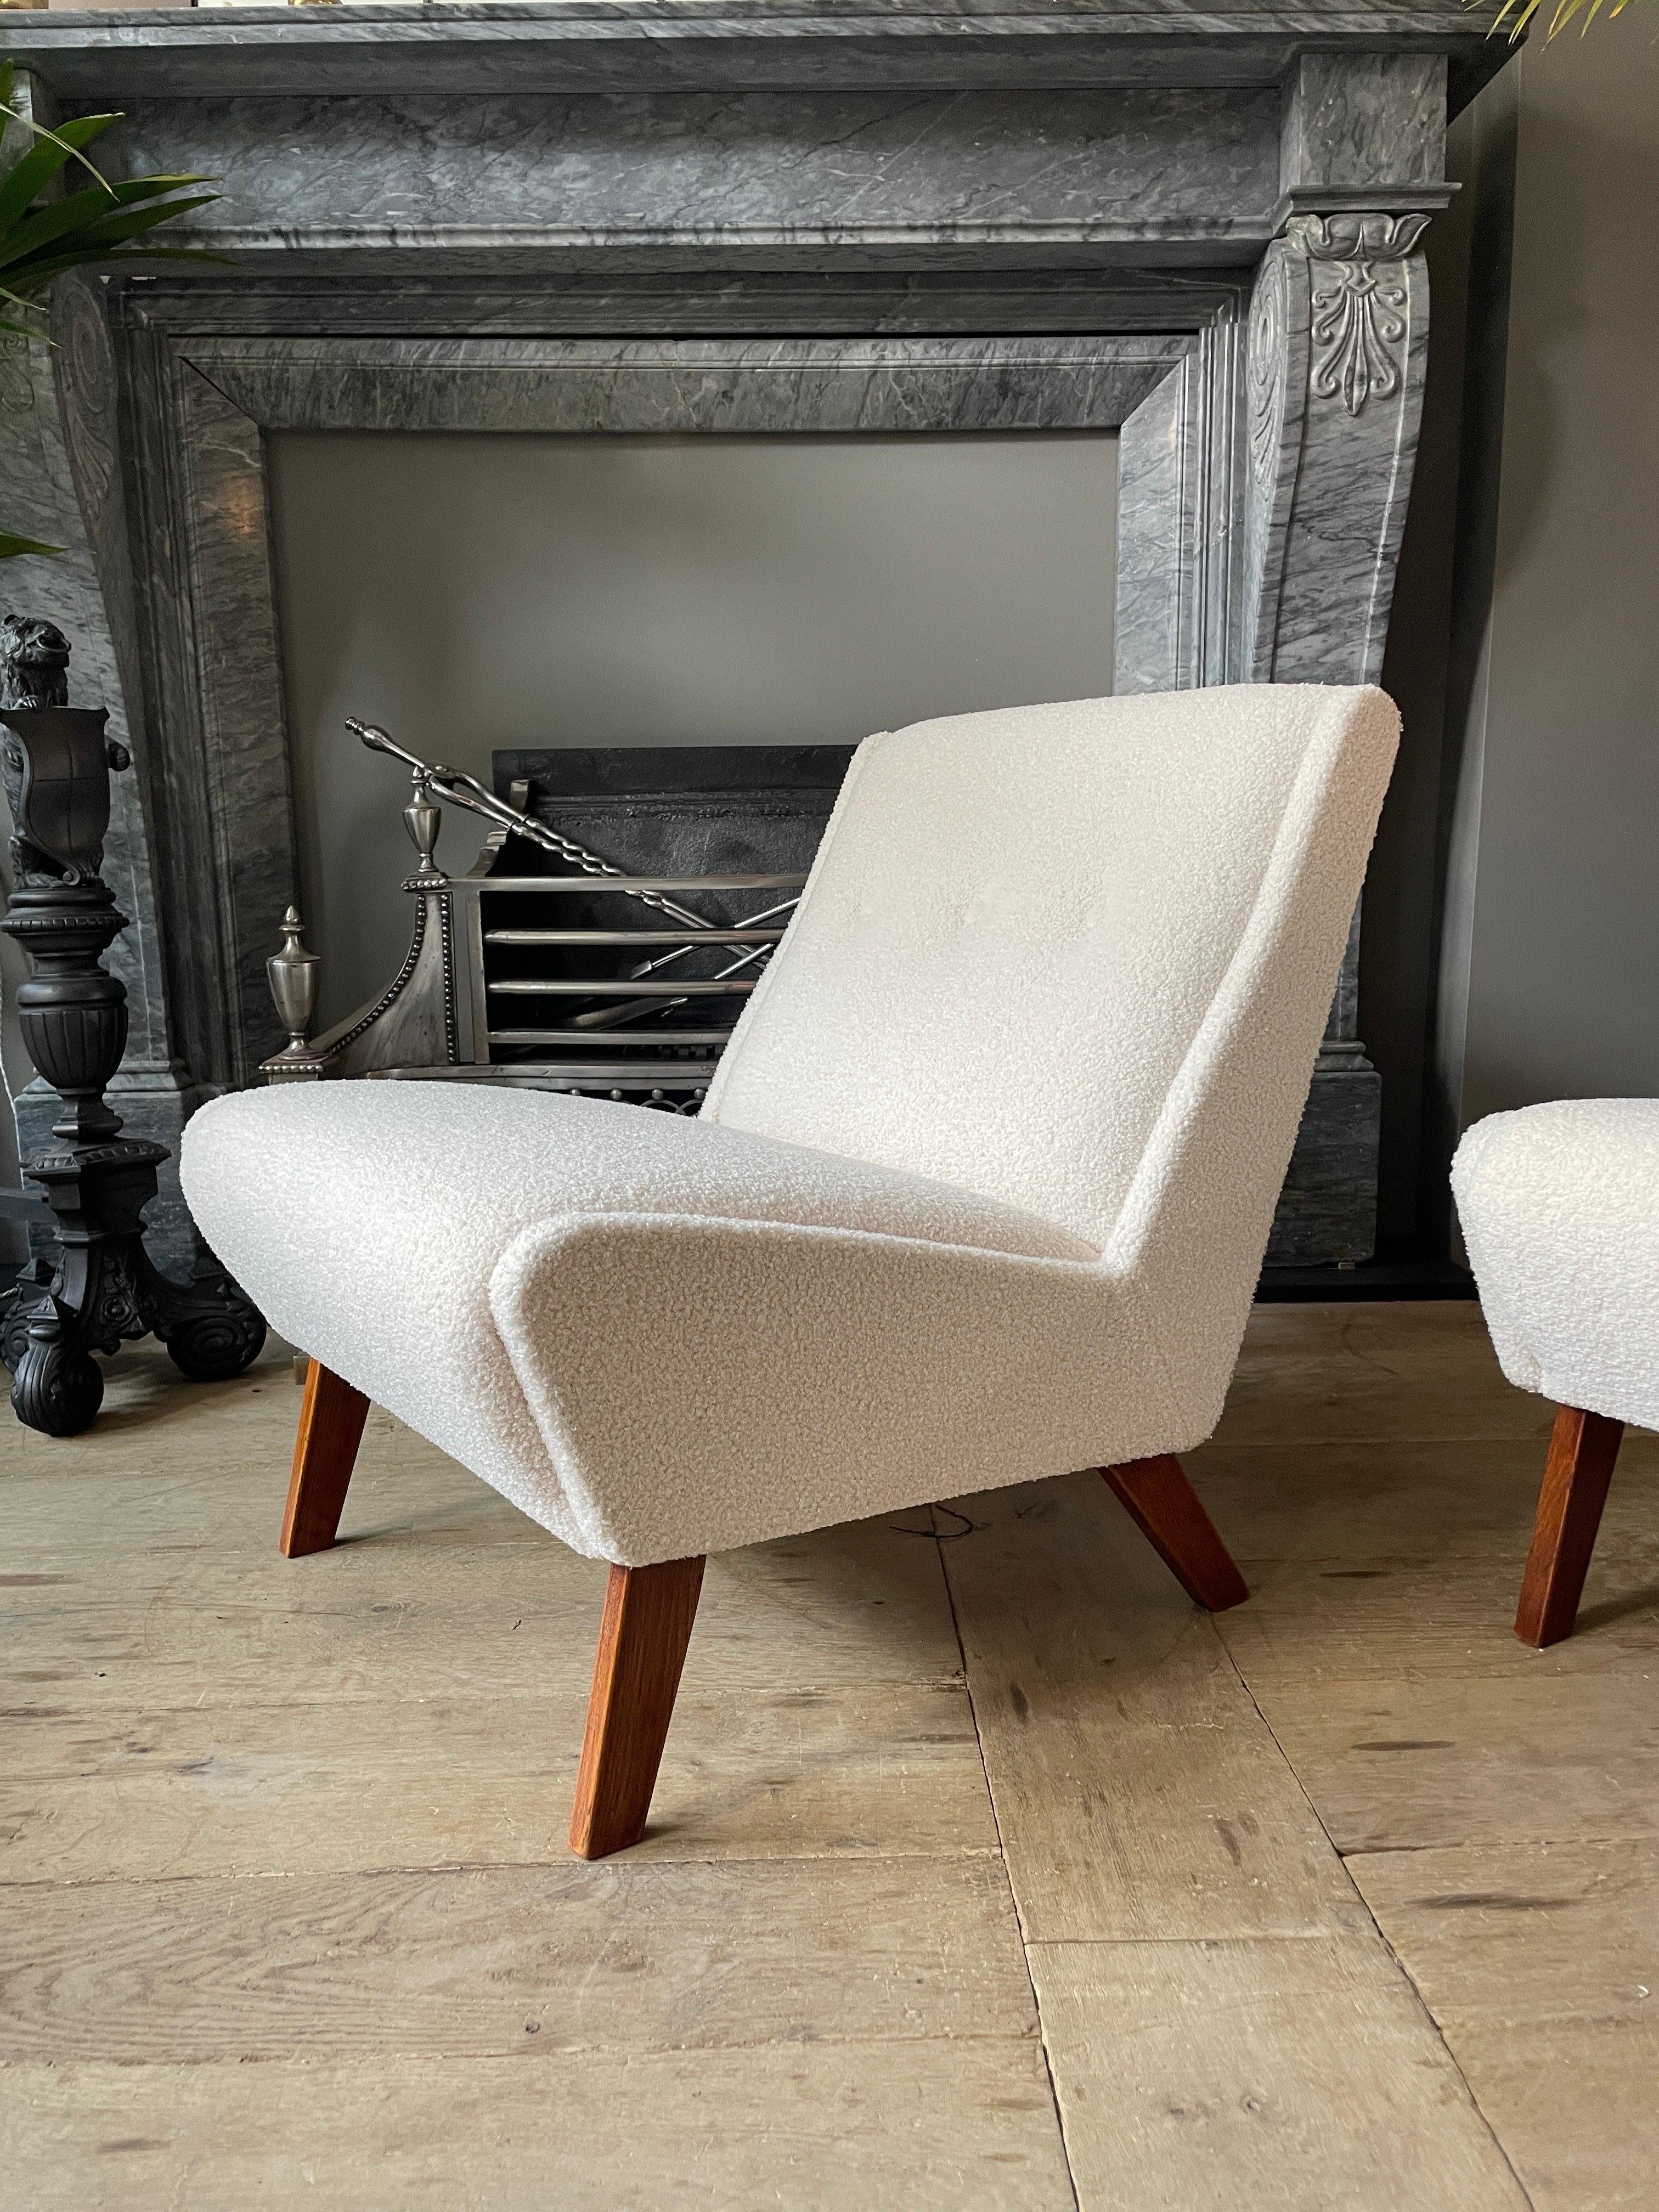 Pair of Mid-Century Modern Chairs by Ernest Race 1